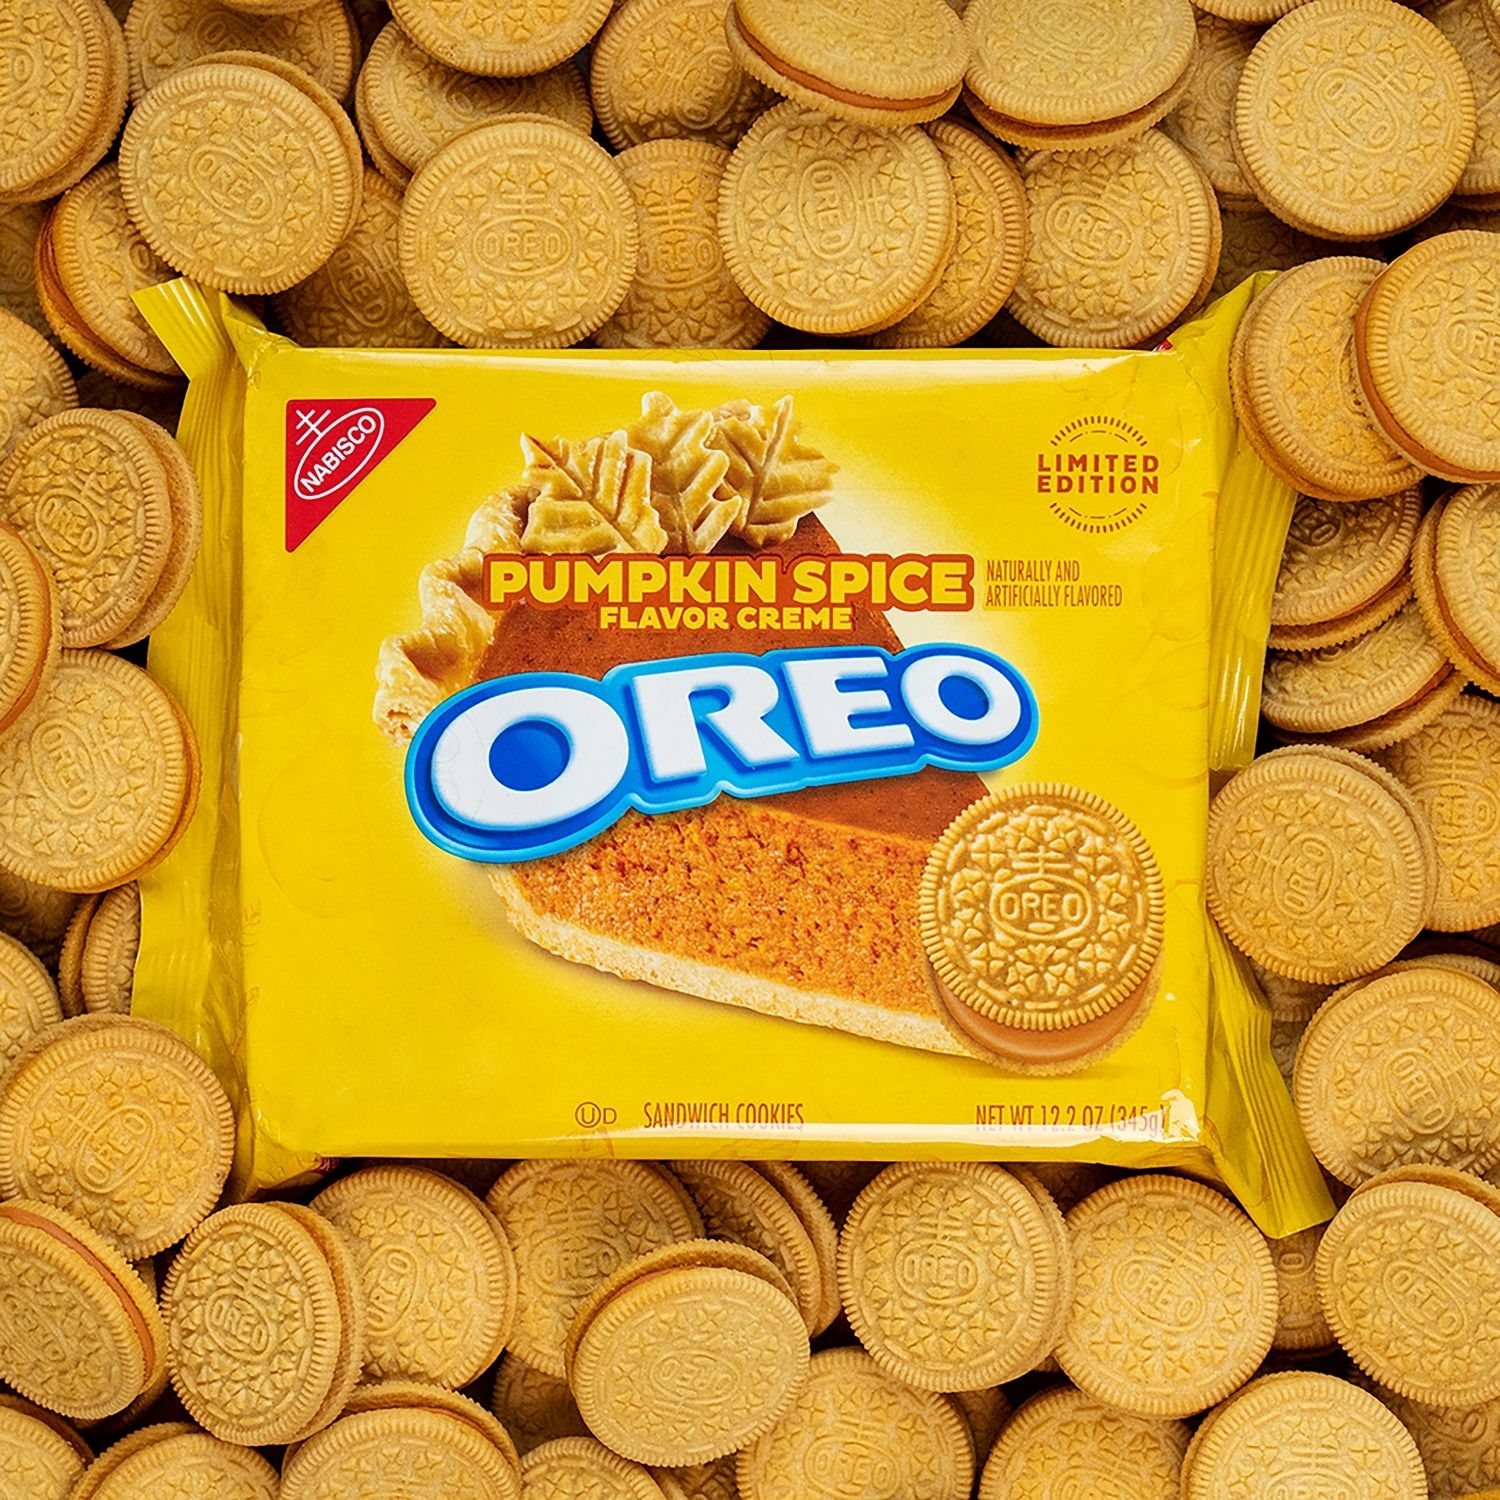 The Oreos, consisting of two golden cookies with orange filling